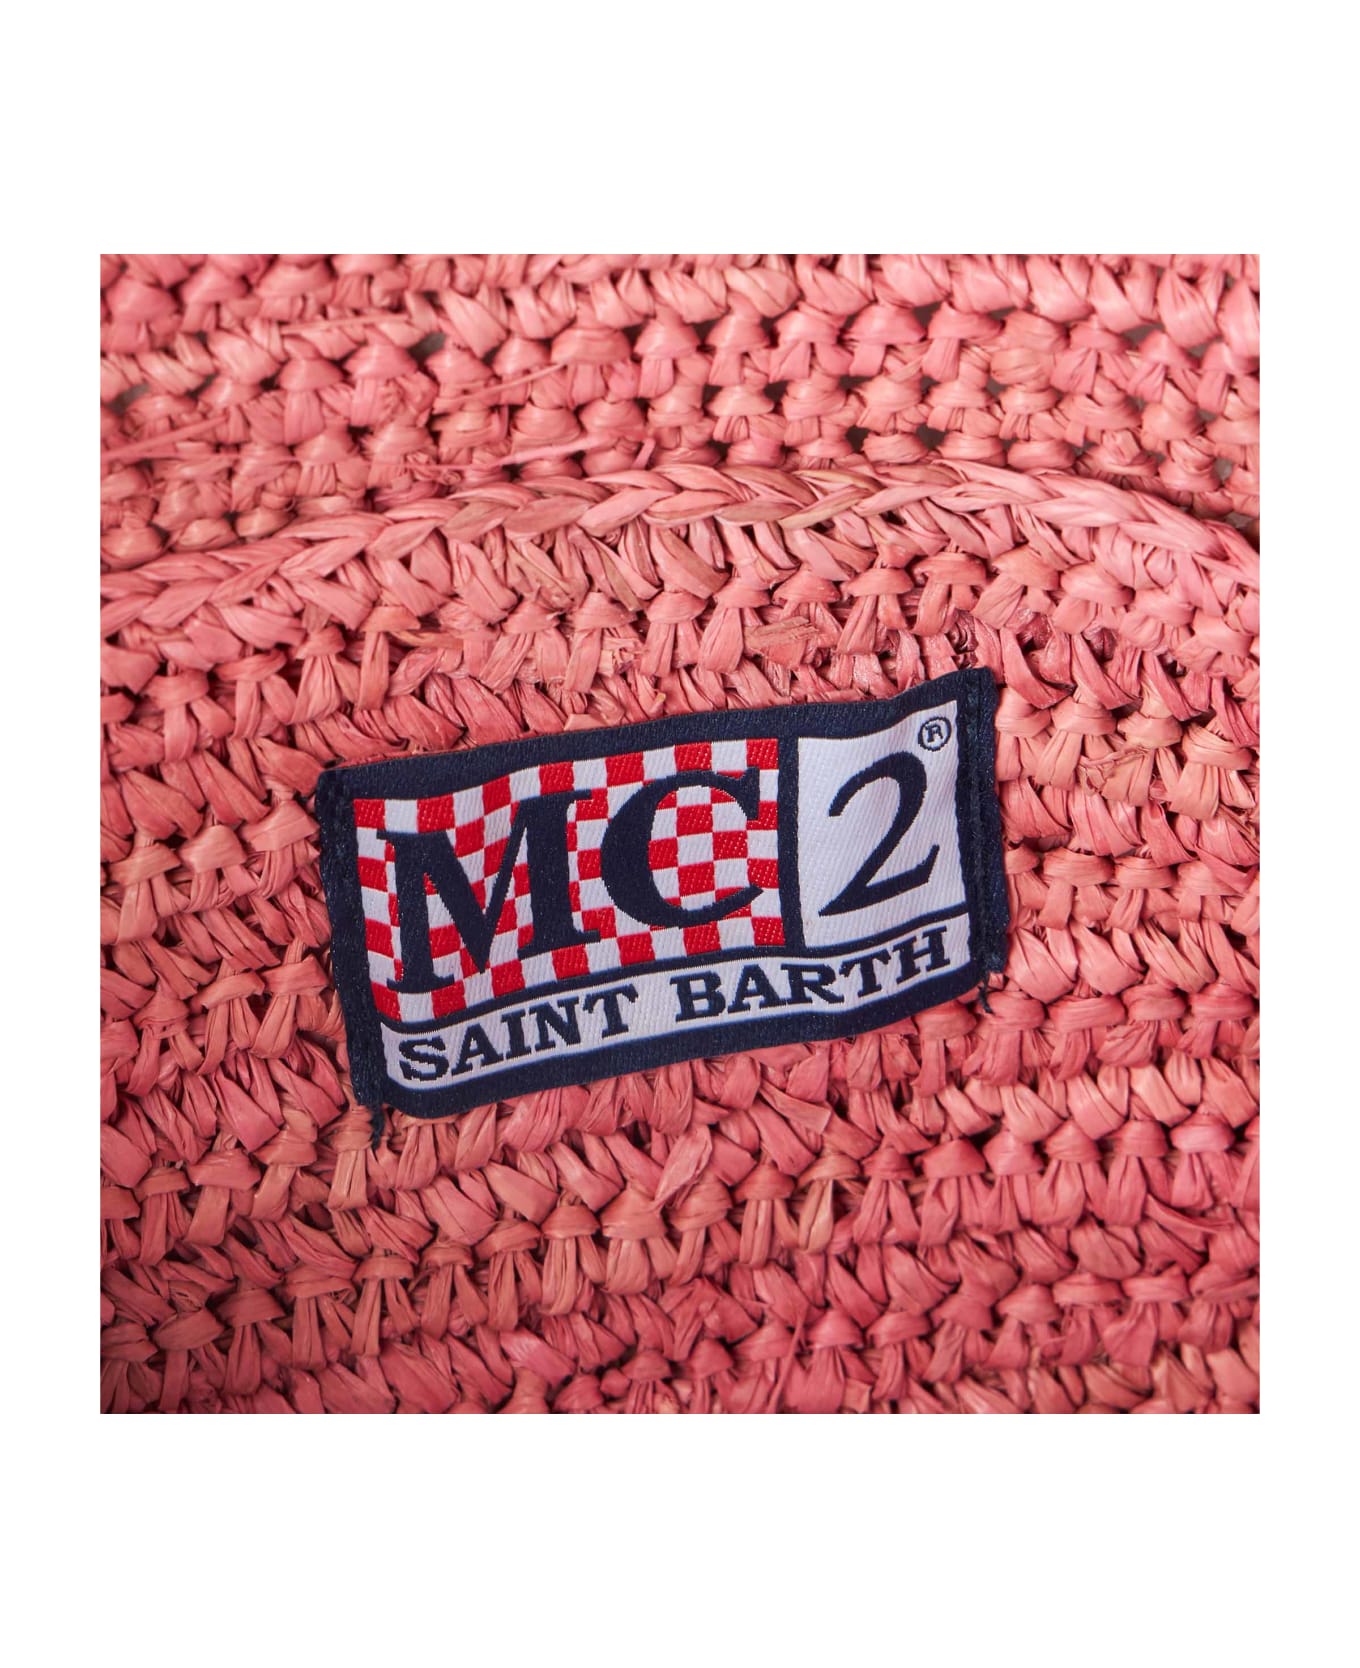 MC2 Saint Barth Raffia Pink Pouch Bag With Front Embroidery - PINK